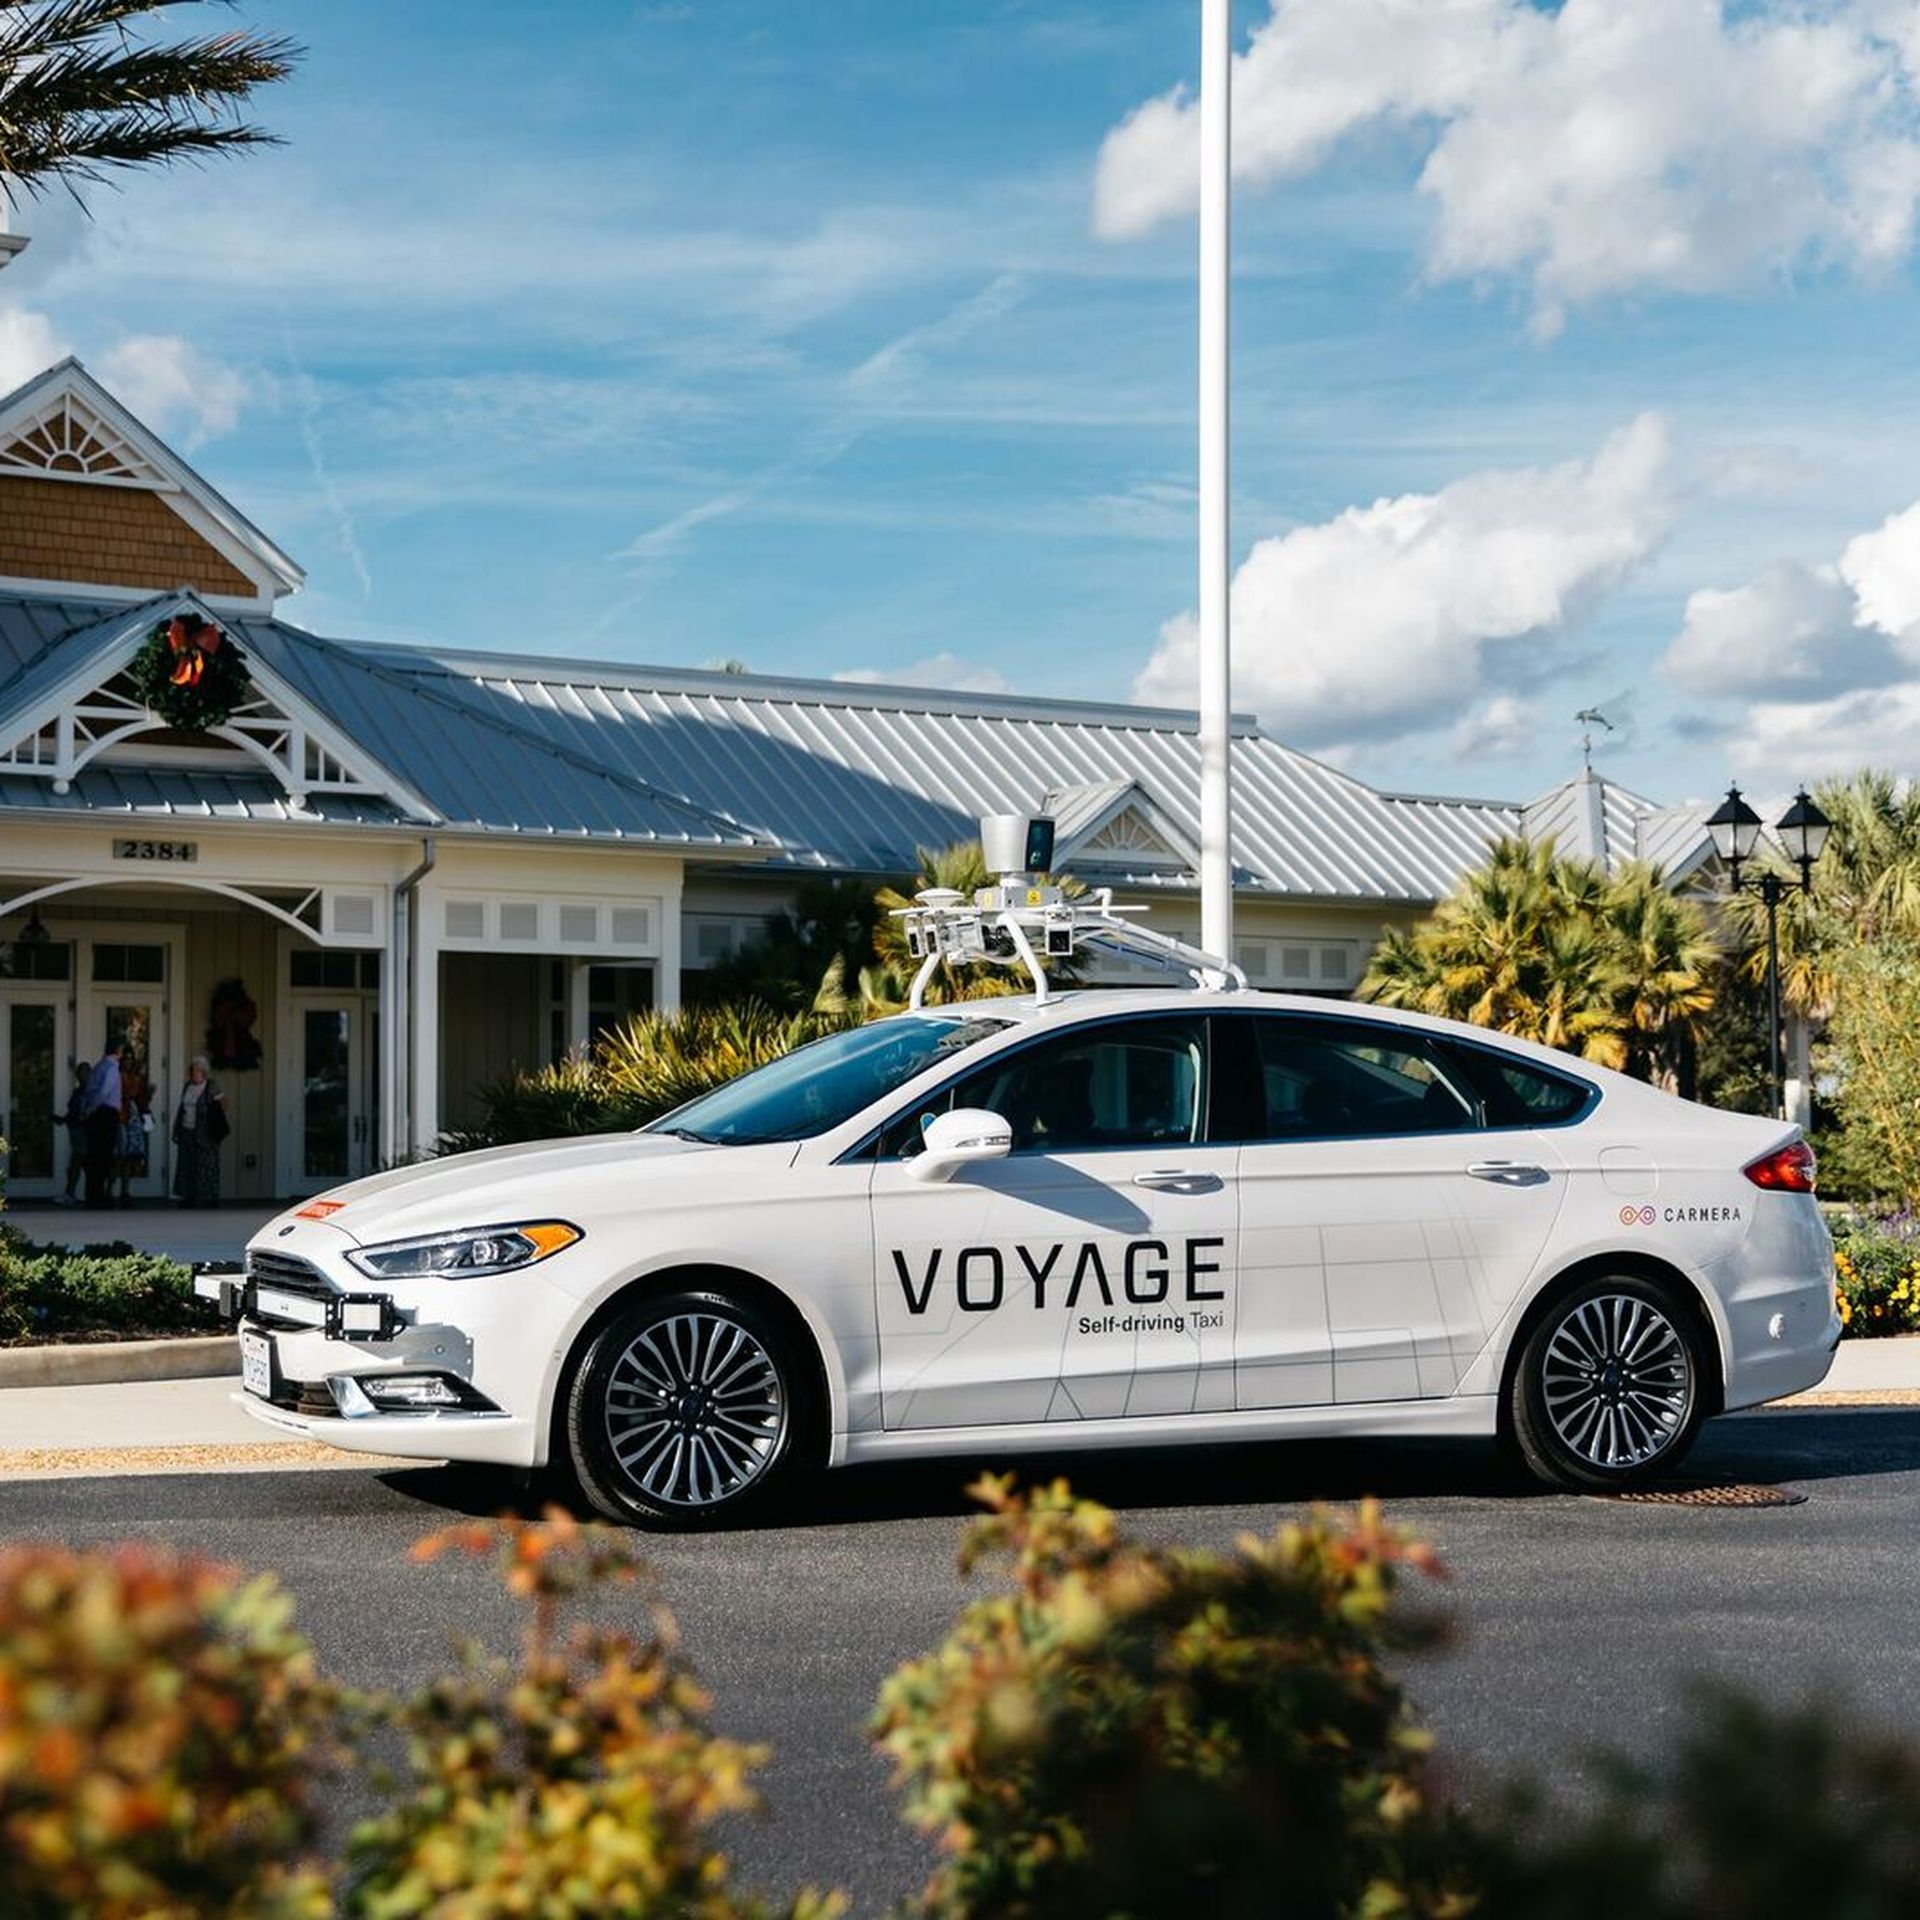 Voyage low-speed AV parked in a Florida retirement community